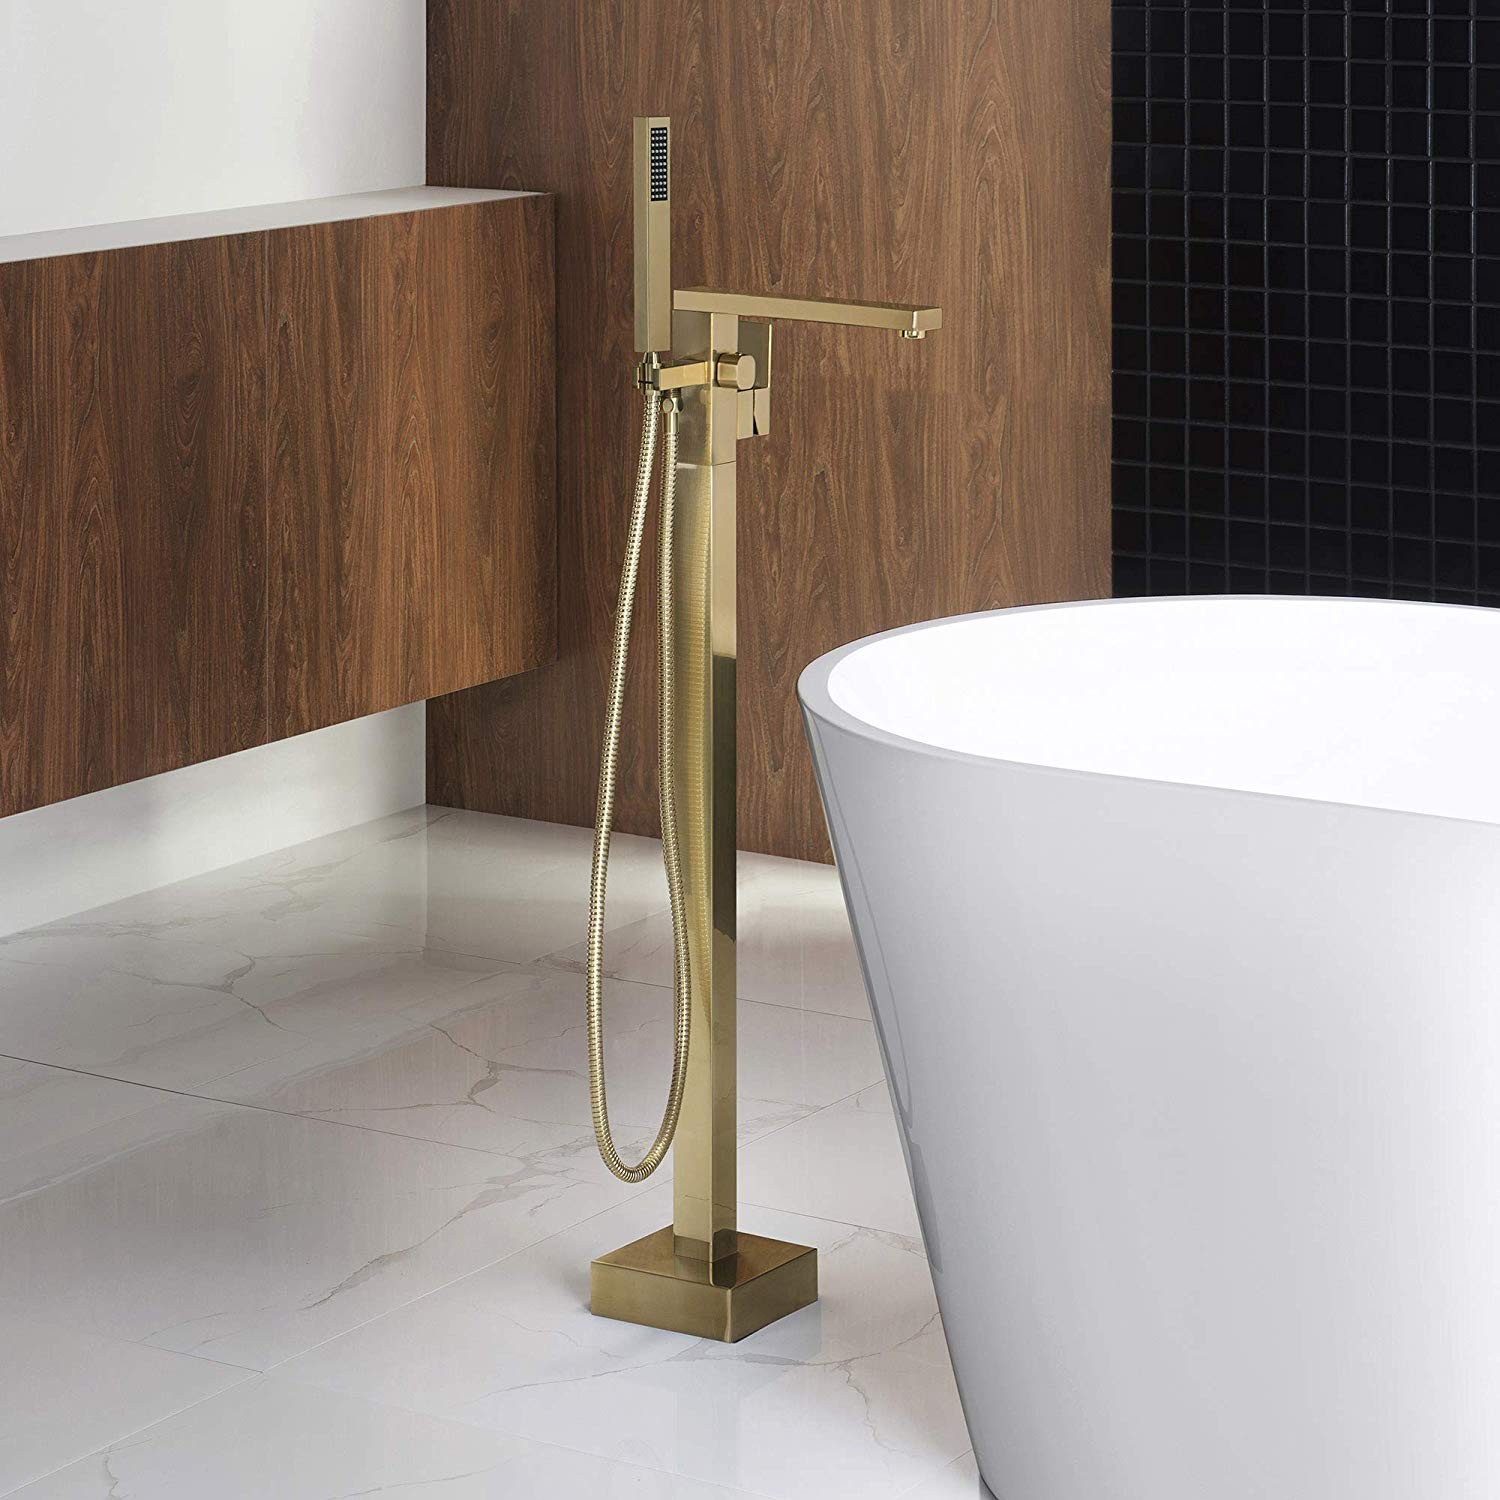  WOODBRIDGE F0008BG Contemporary Single Handle Floor Mount Freestanding Tub Filler Faucet with Hand shower in Brushed Gold Finish._10002